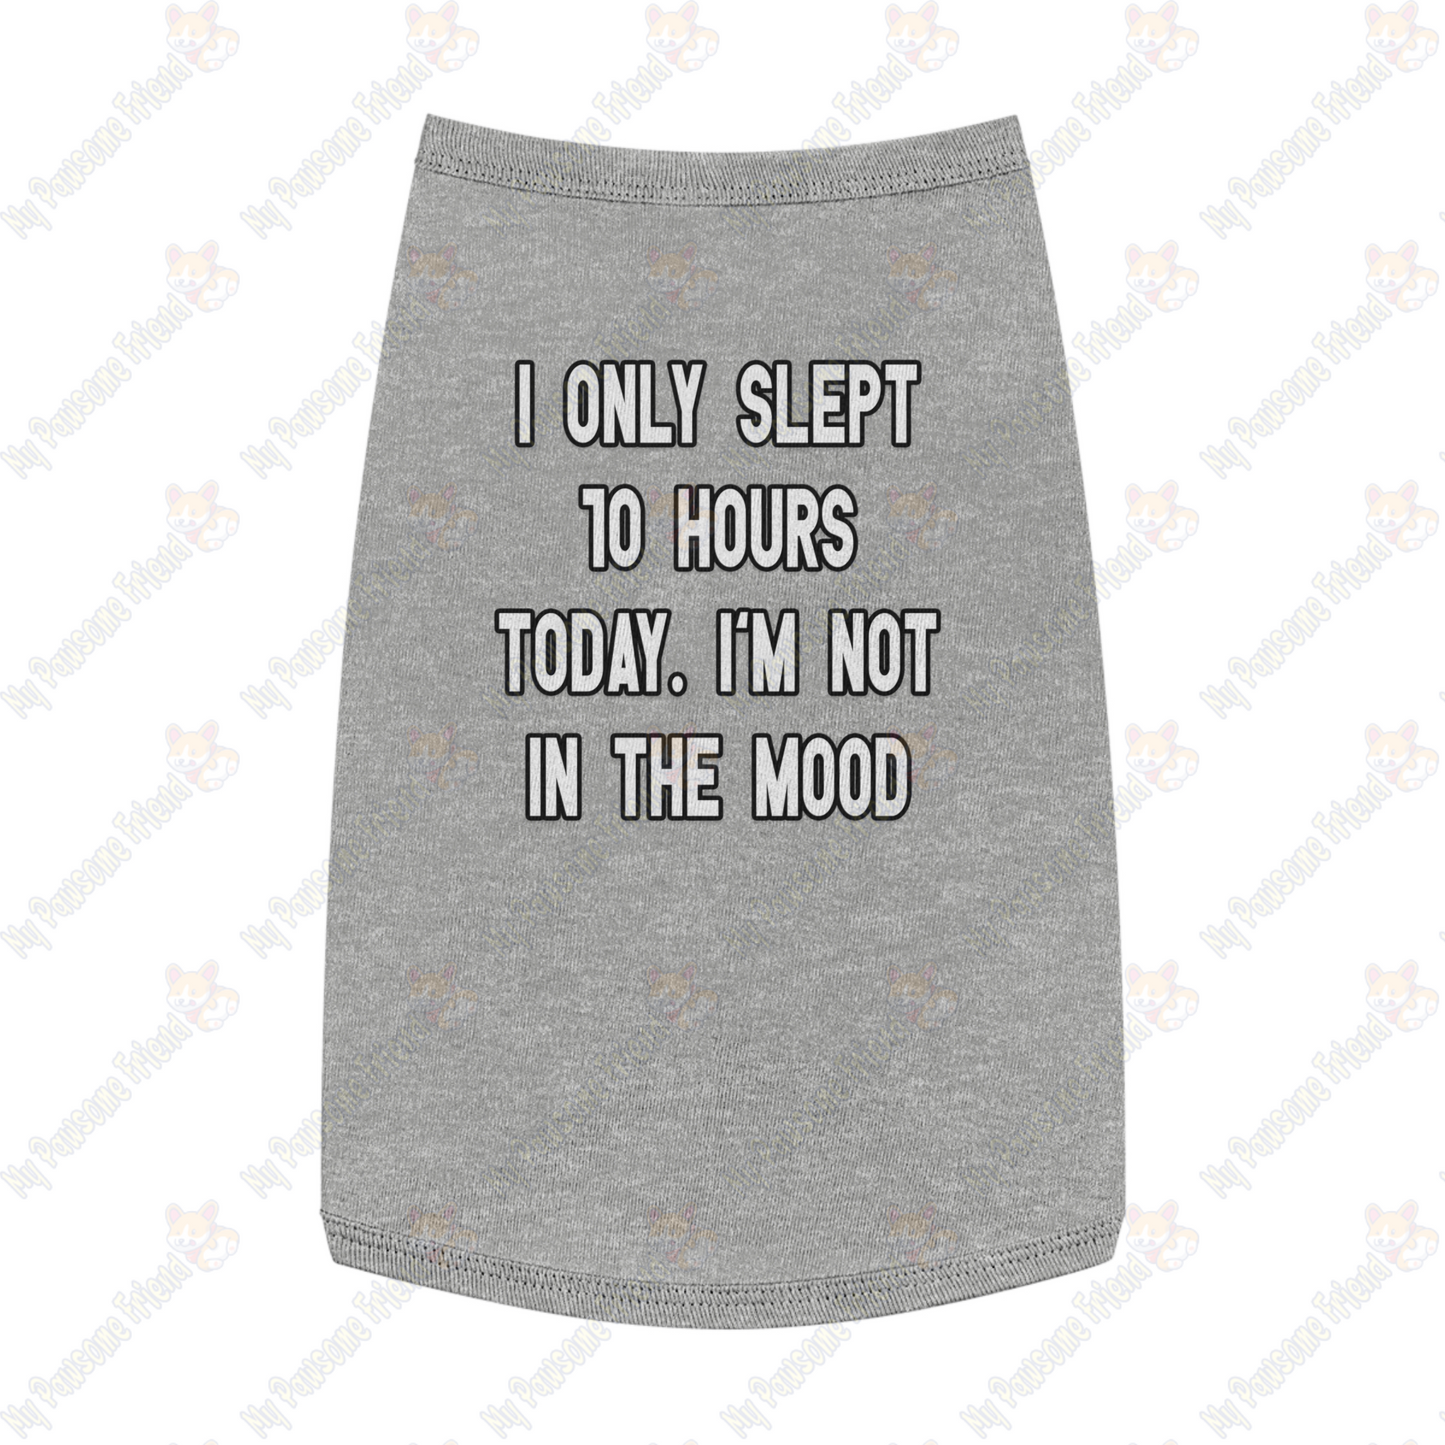 I ONLY SLEPT 10 HOURS TODAY. I'M NOT IN THE MOOD Pet Tank Top grey